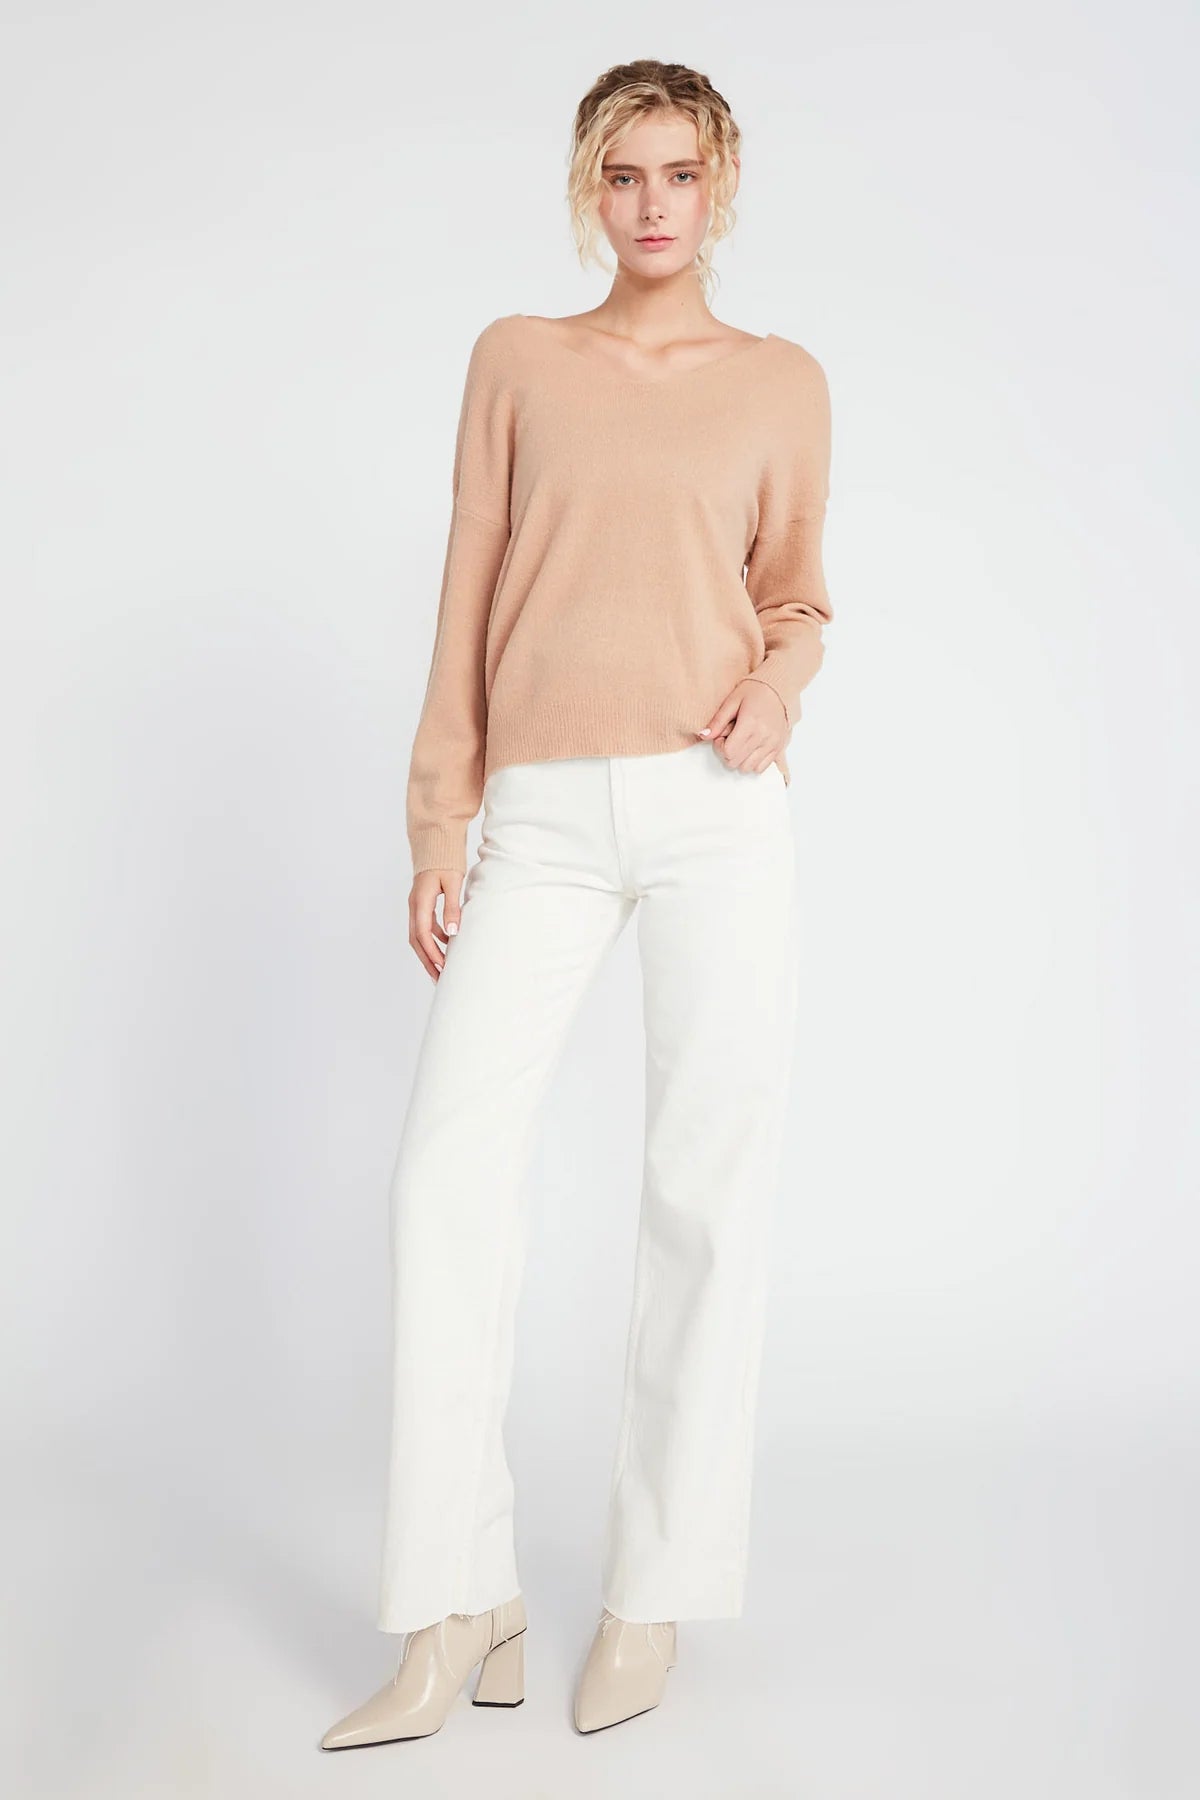 Look by M V-Neck Sweater